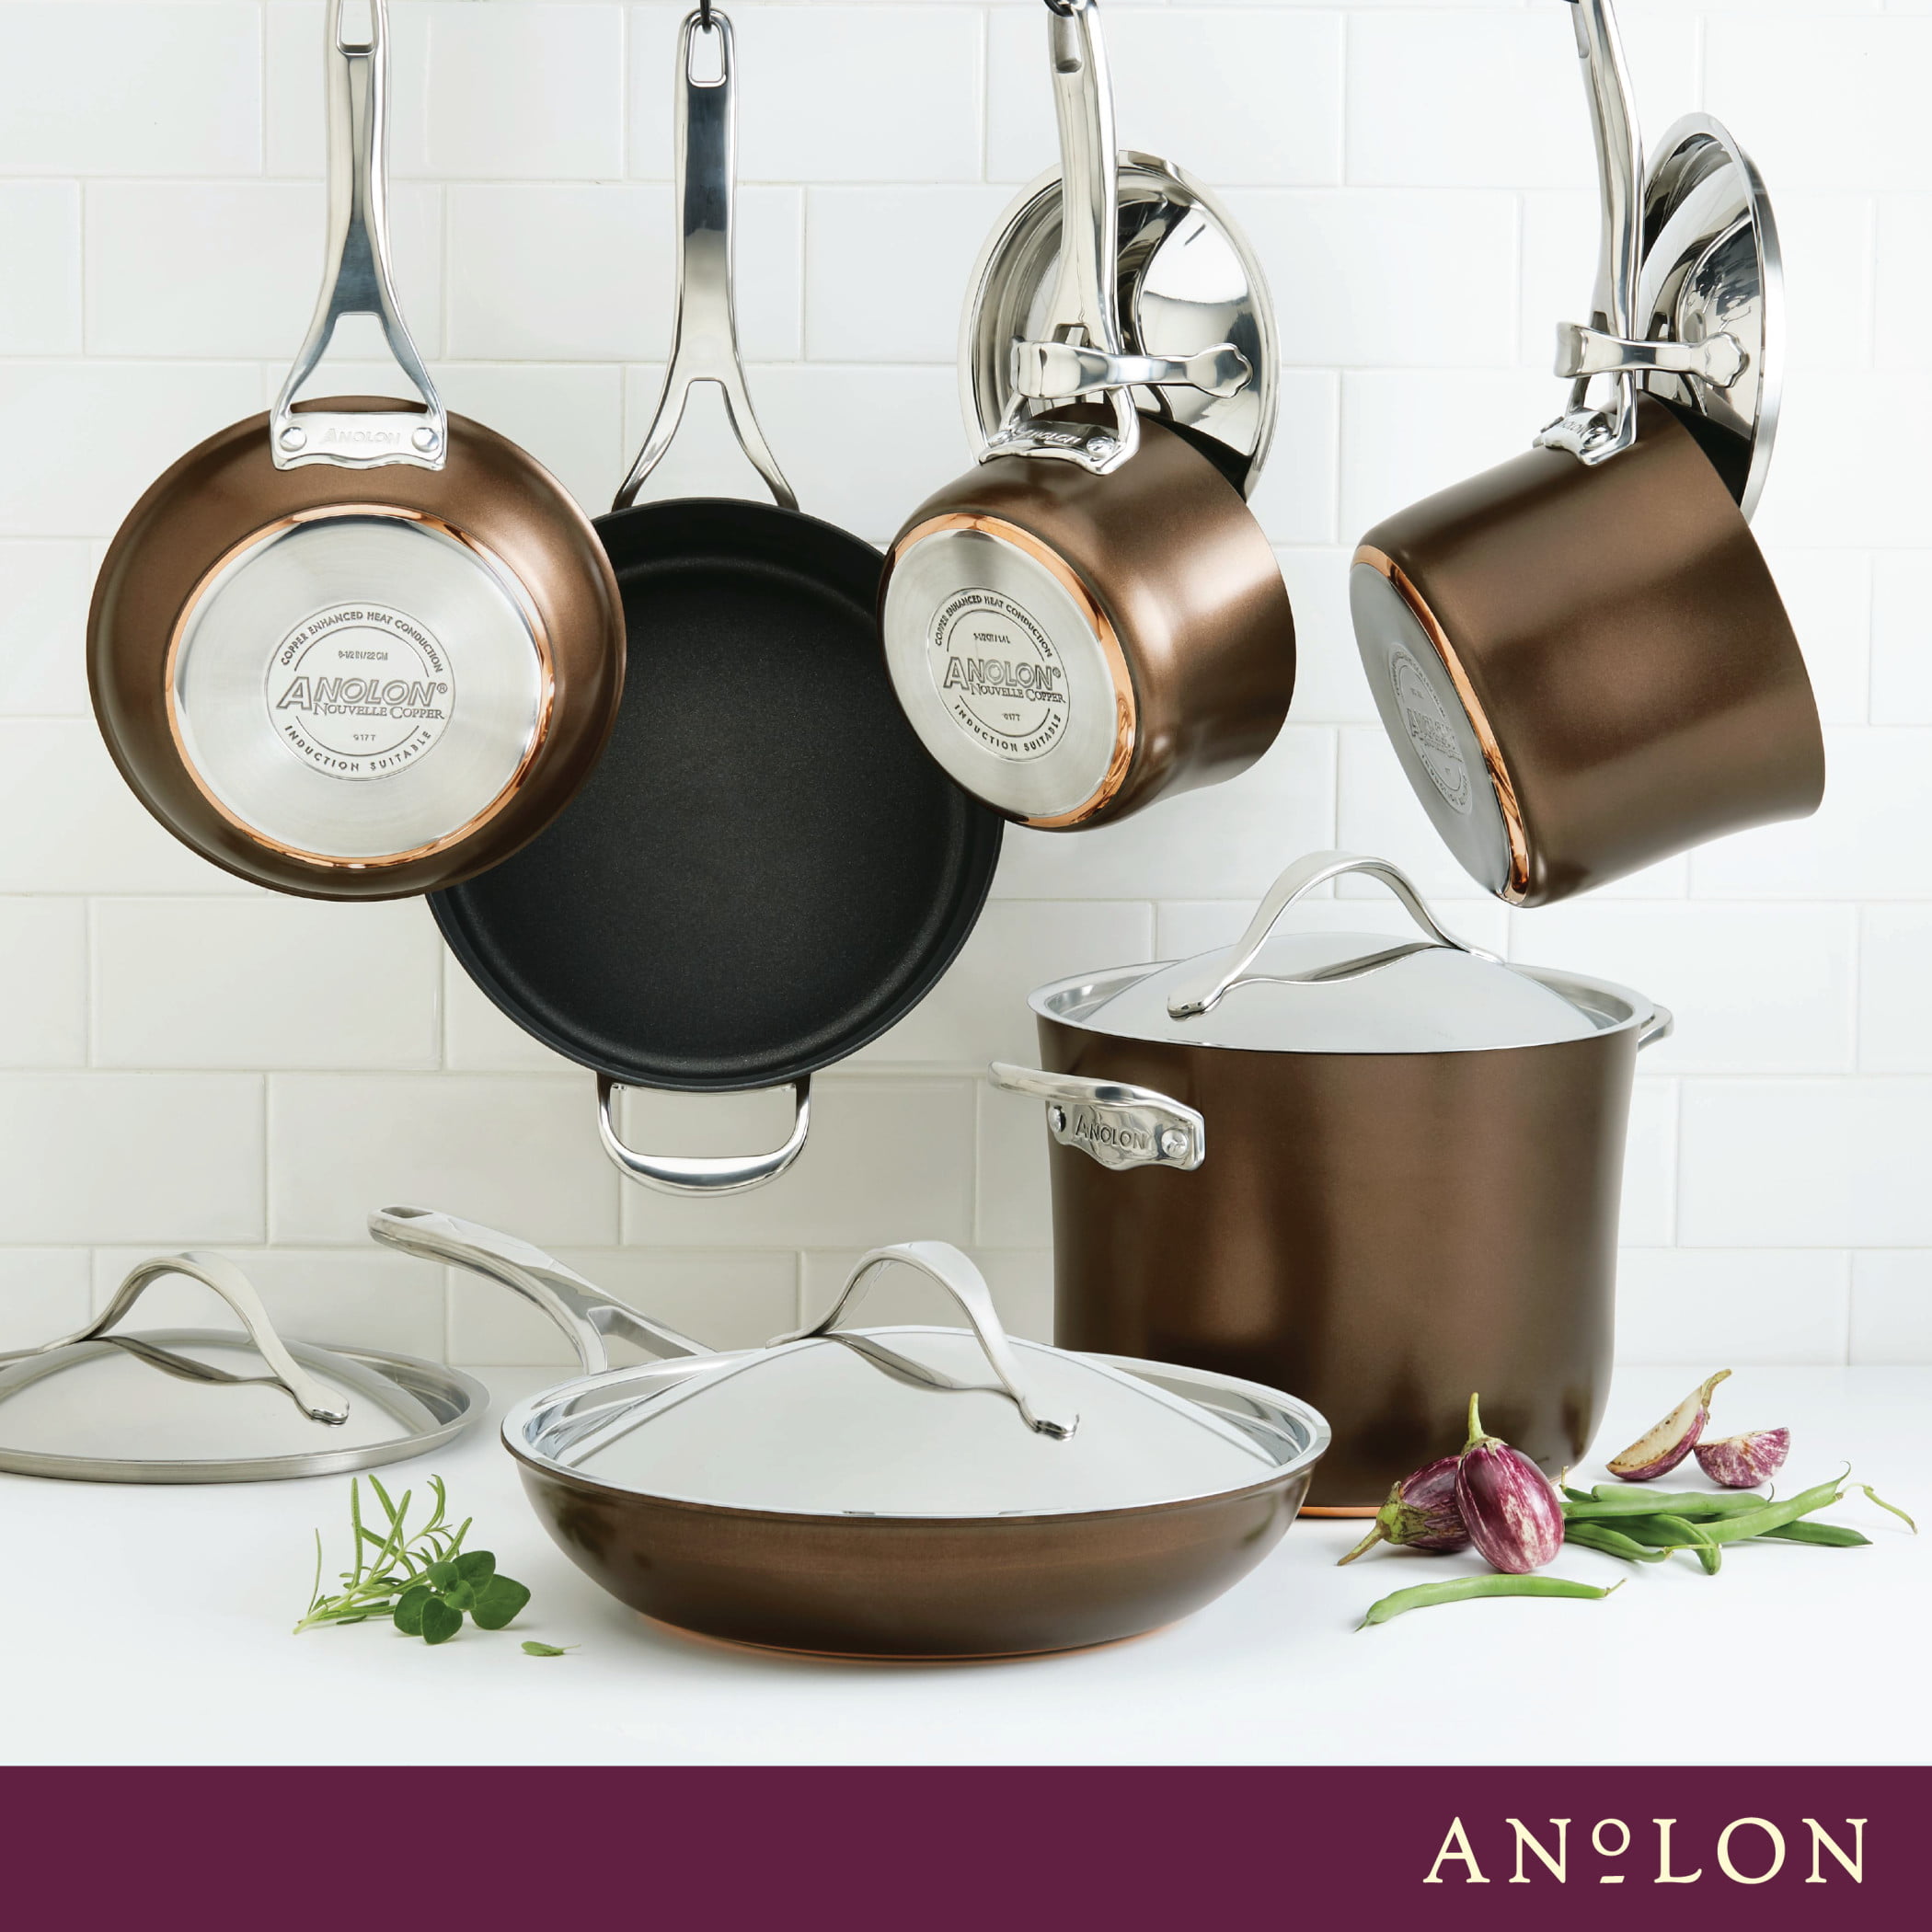 Anolon Nouvelle Copper Stainless Steel Induction Frying Pan